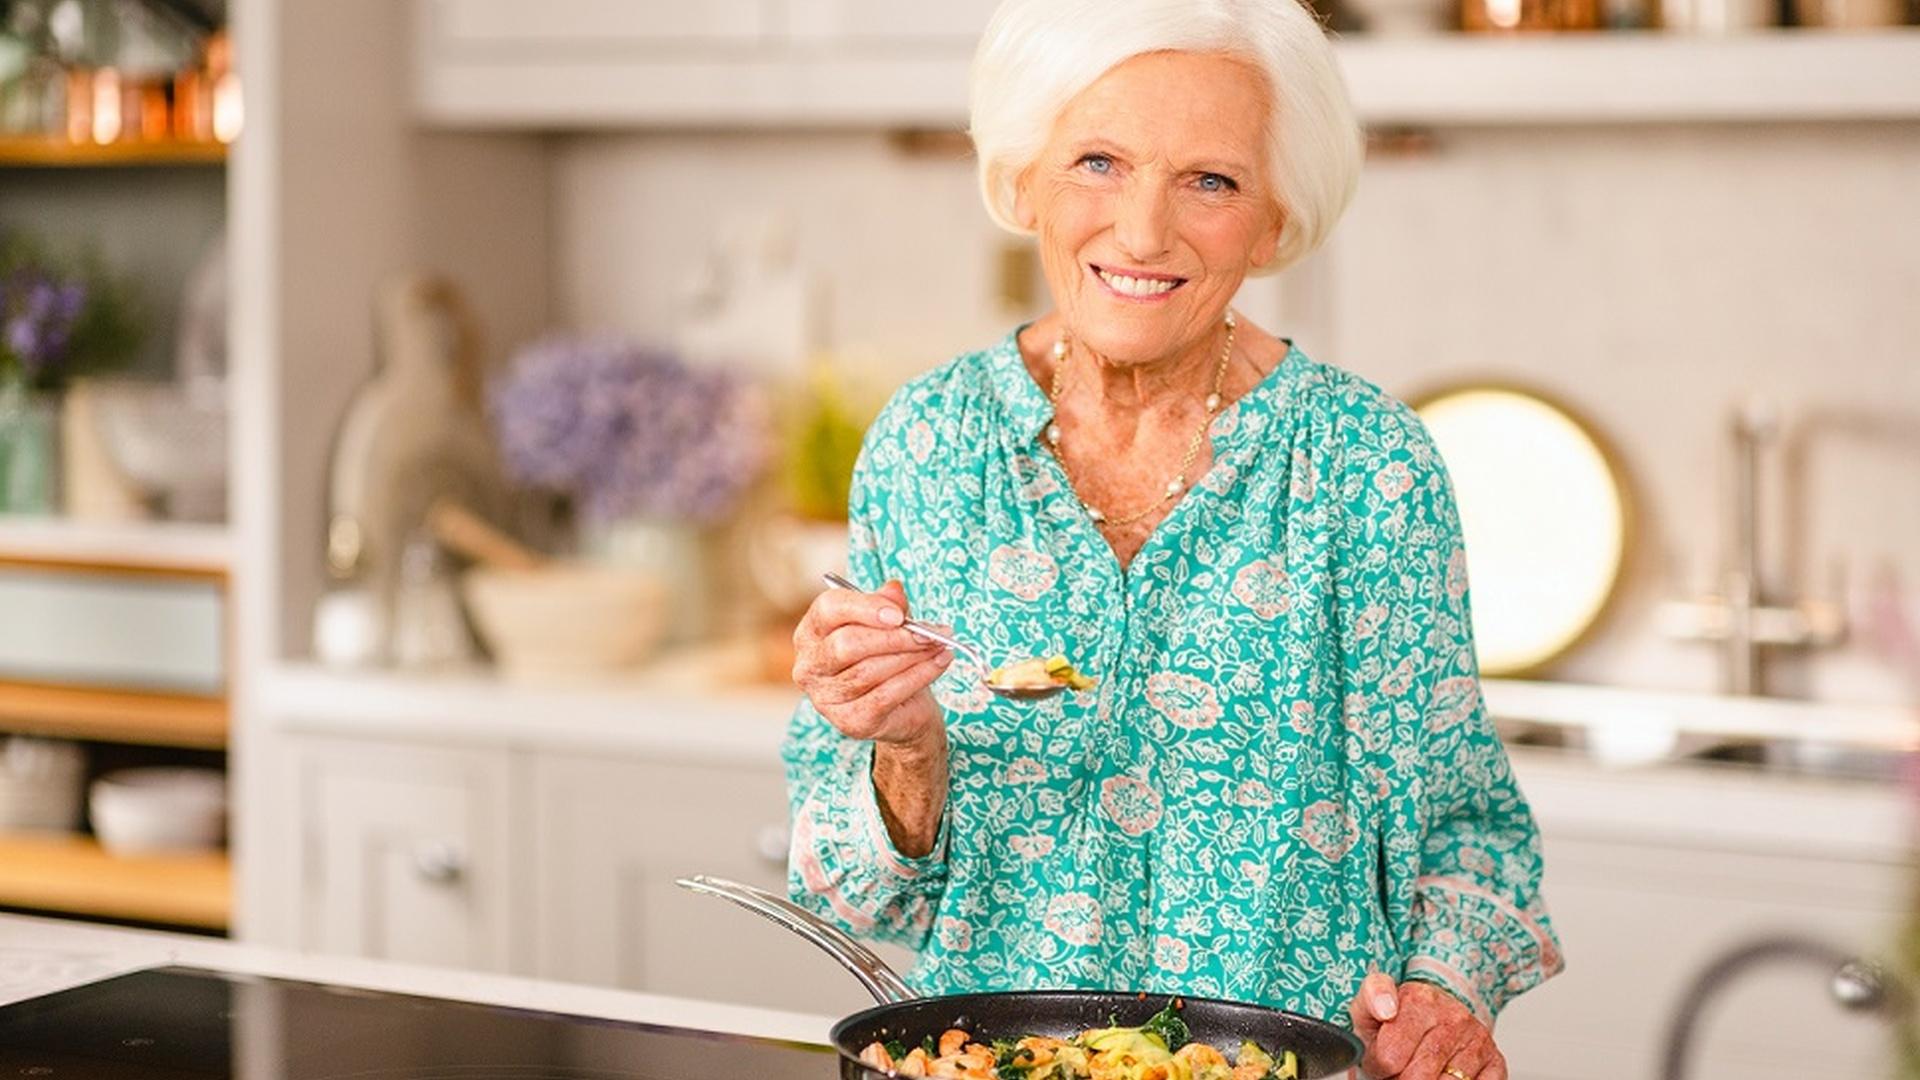 MARY BERRY COOK AND SHARE <br/>Memories